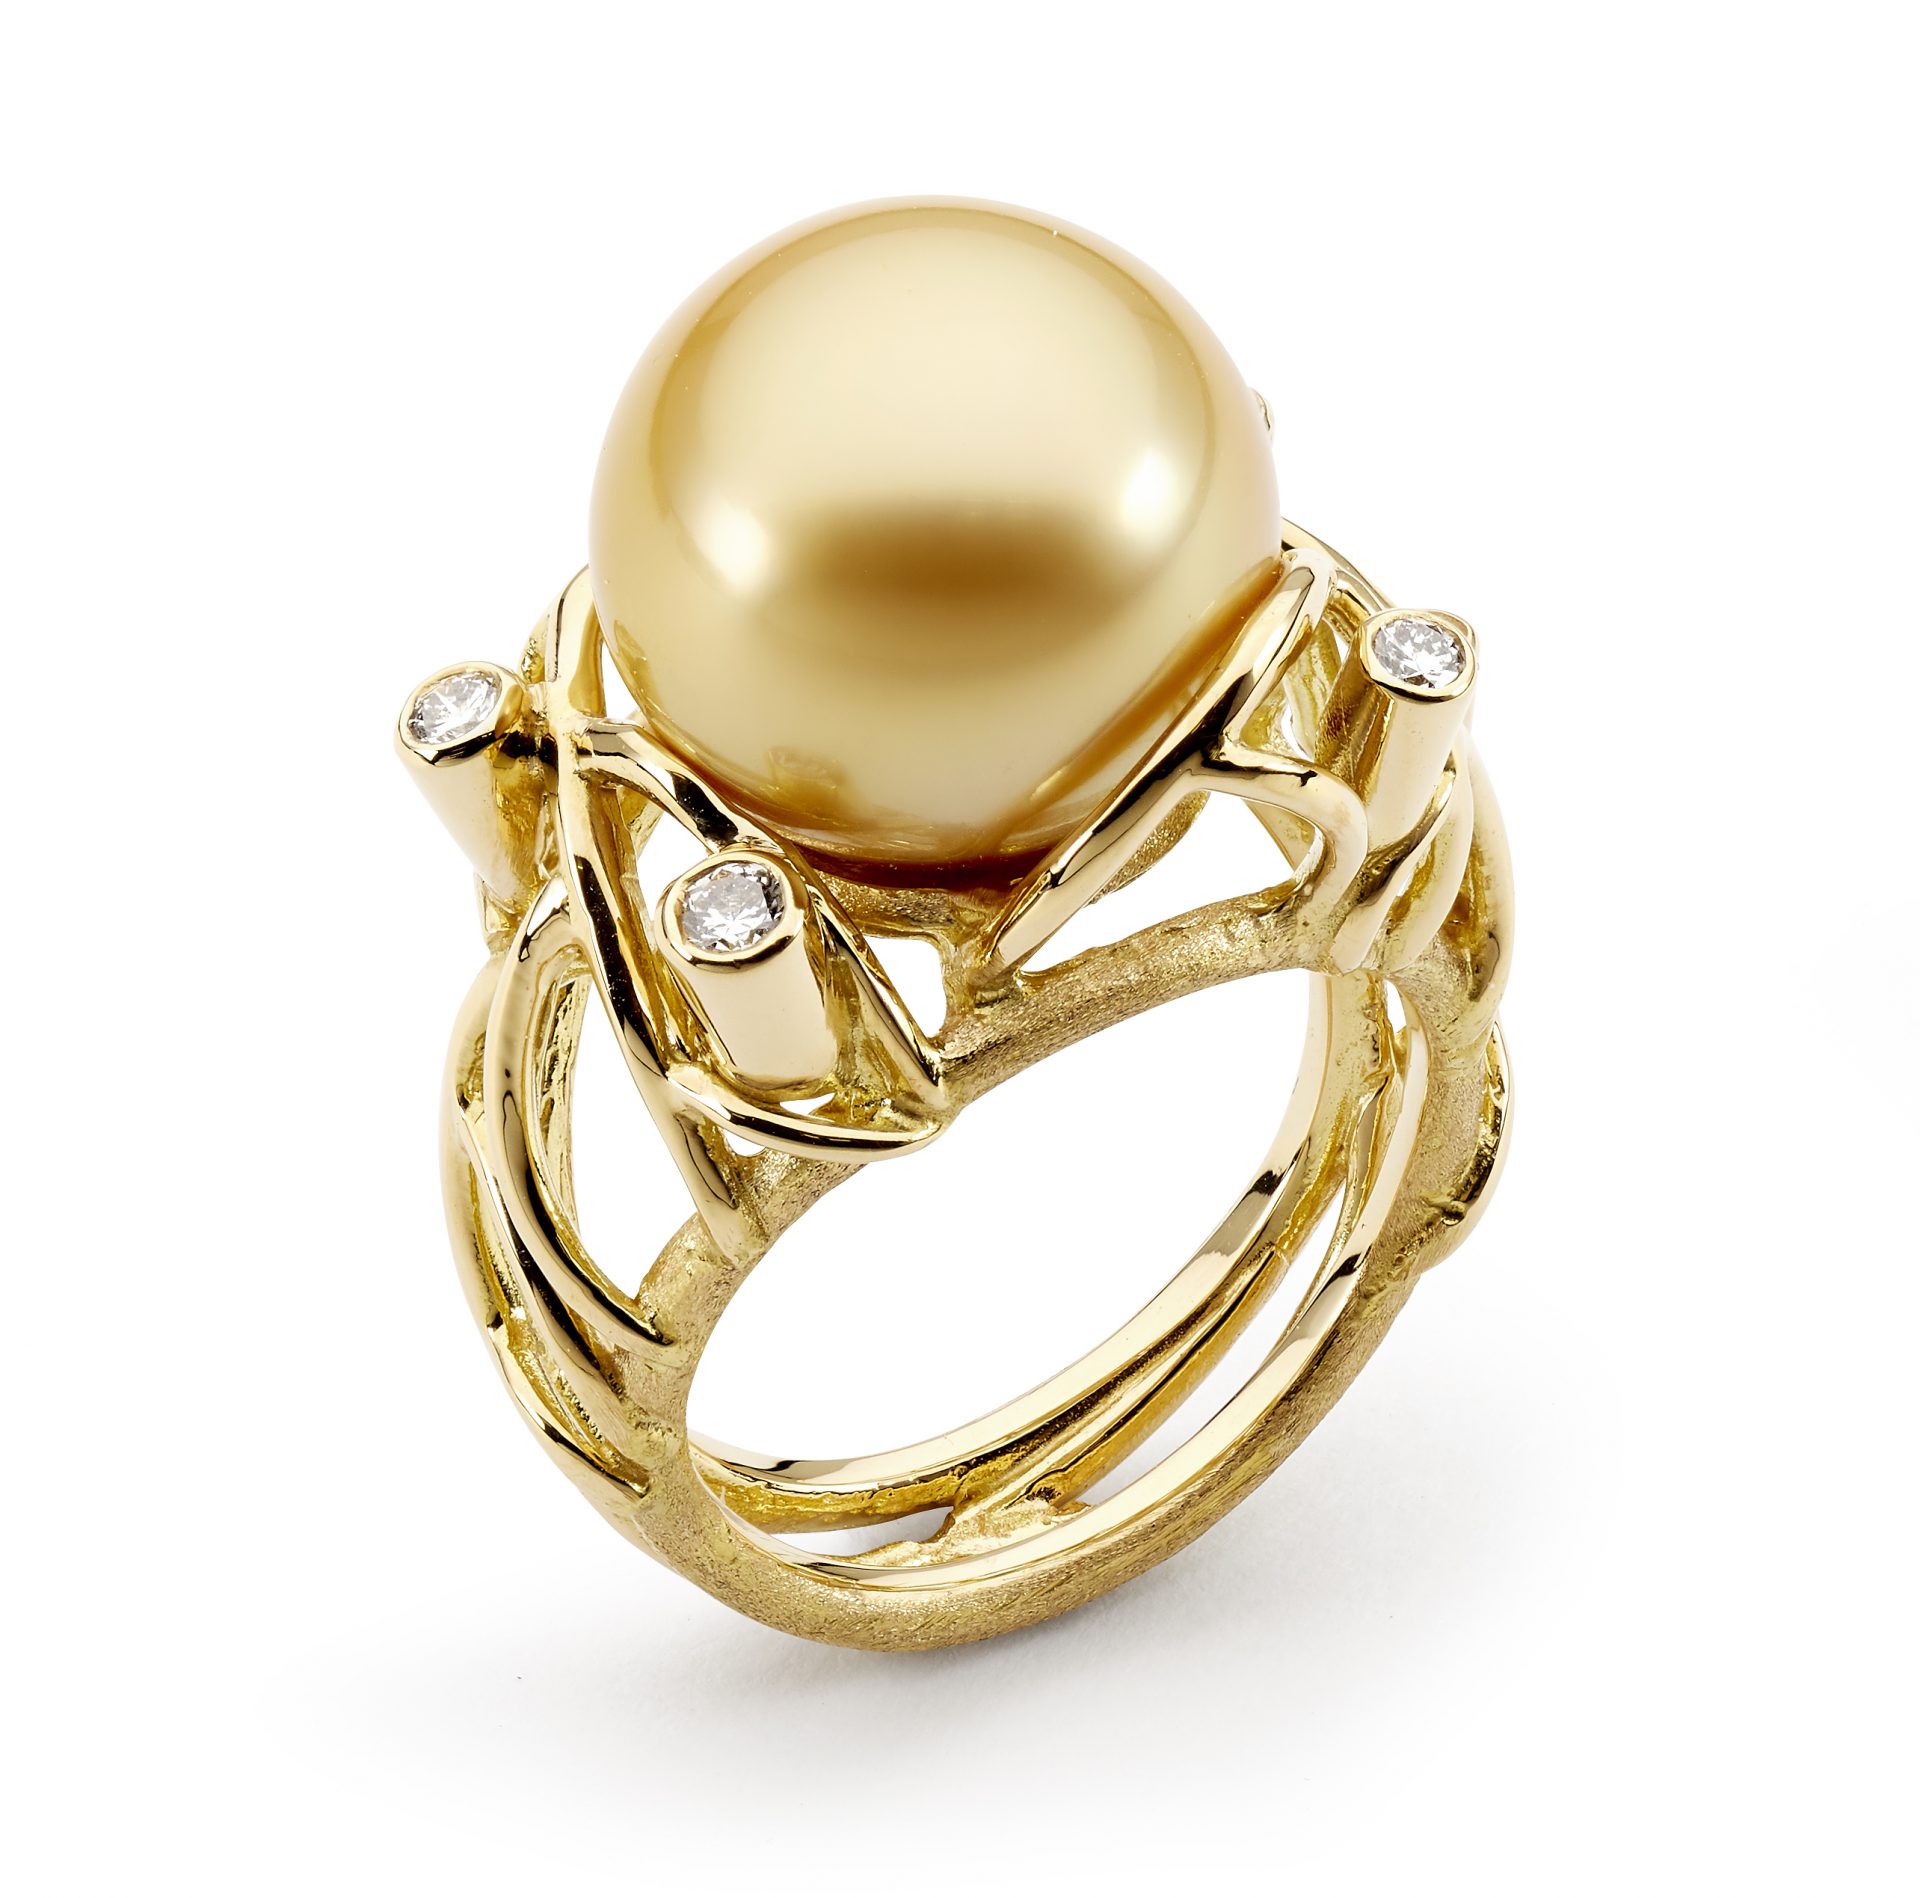 Mangrove Gold Ring - Allure South Sea Pearls